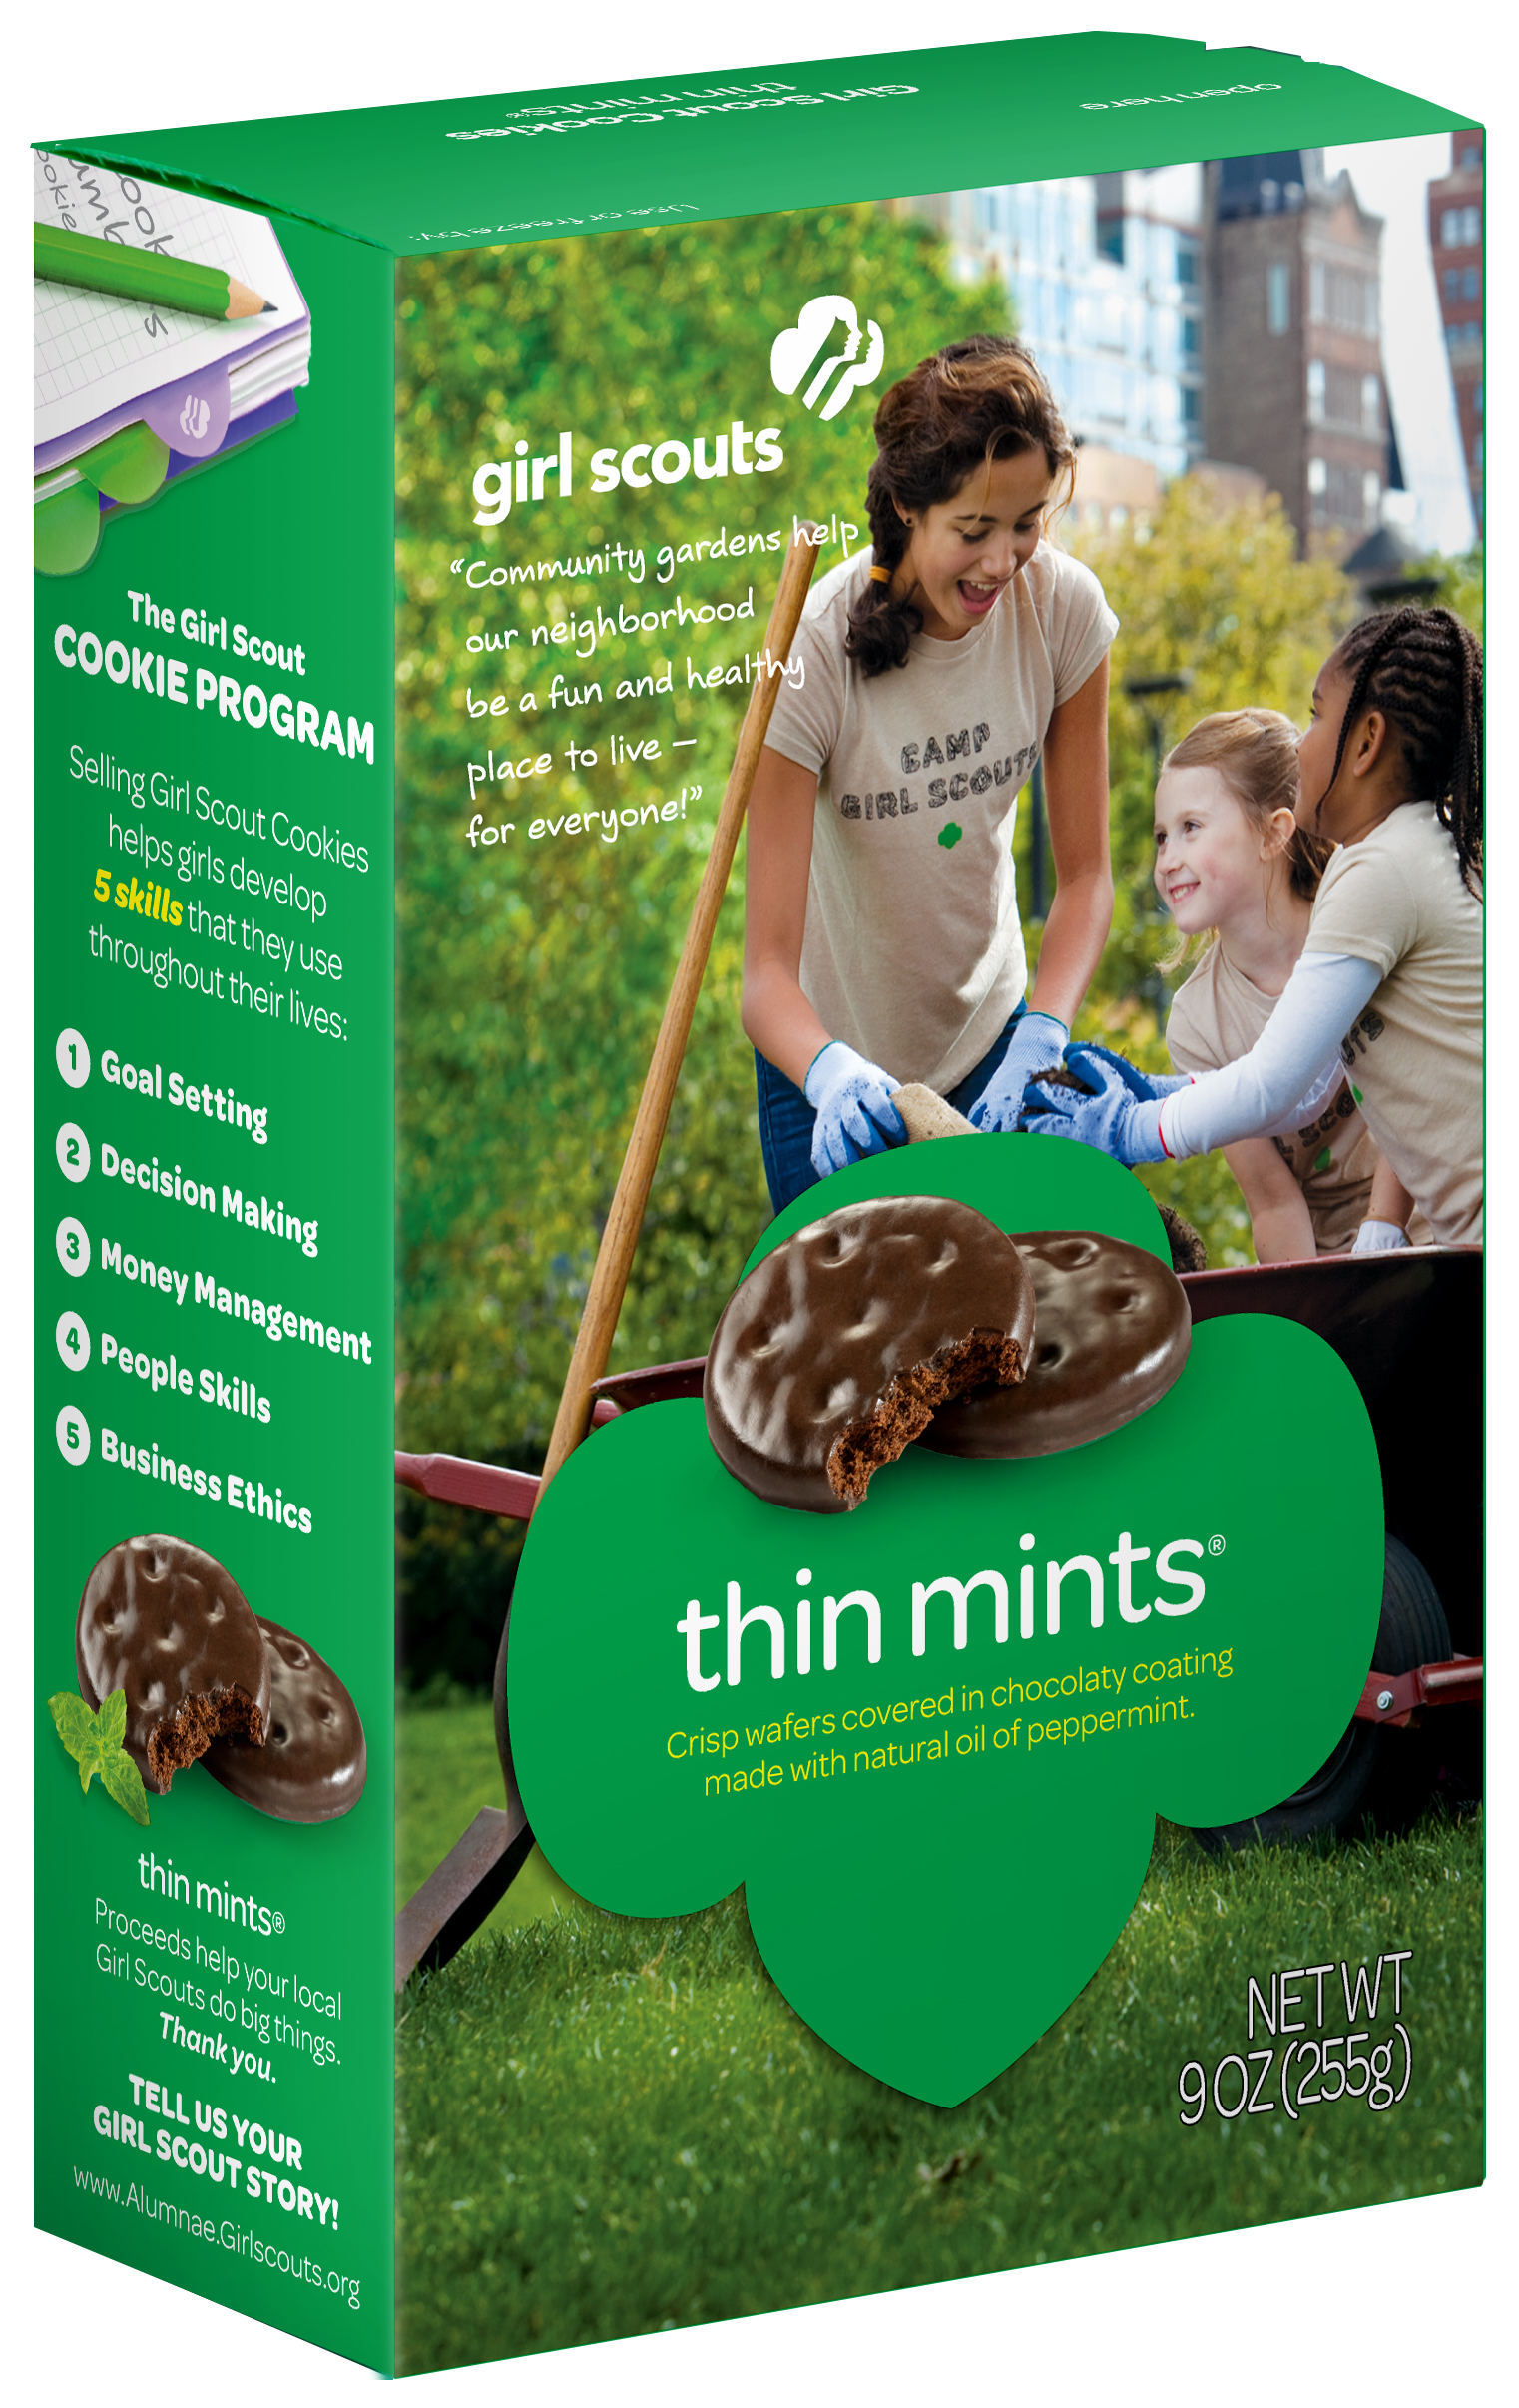 1000+ images about Girl Scout Cookies on Pinterest.